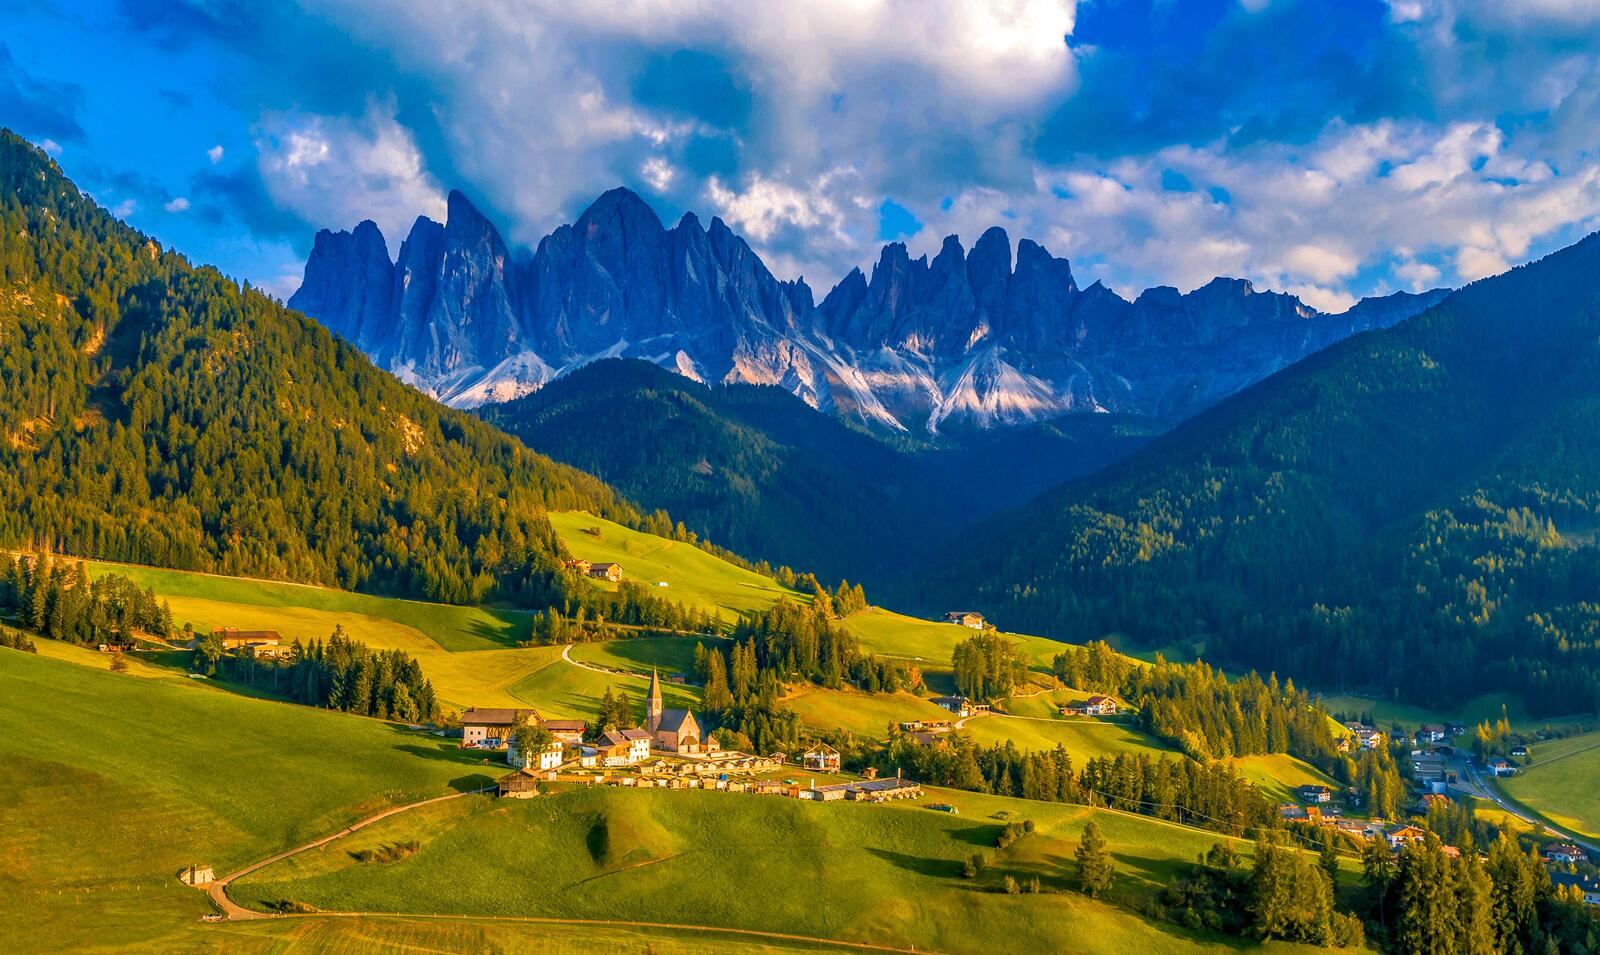 Wallpapers Dolemites the Dolomites Italy on the desktop